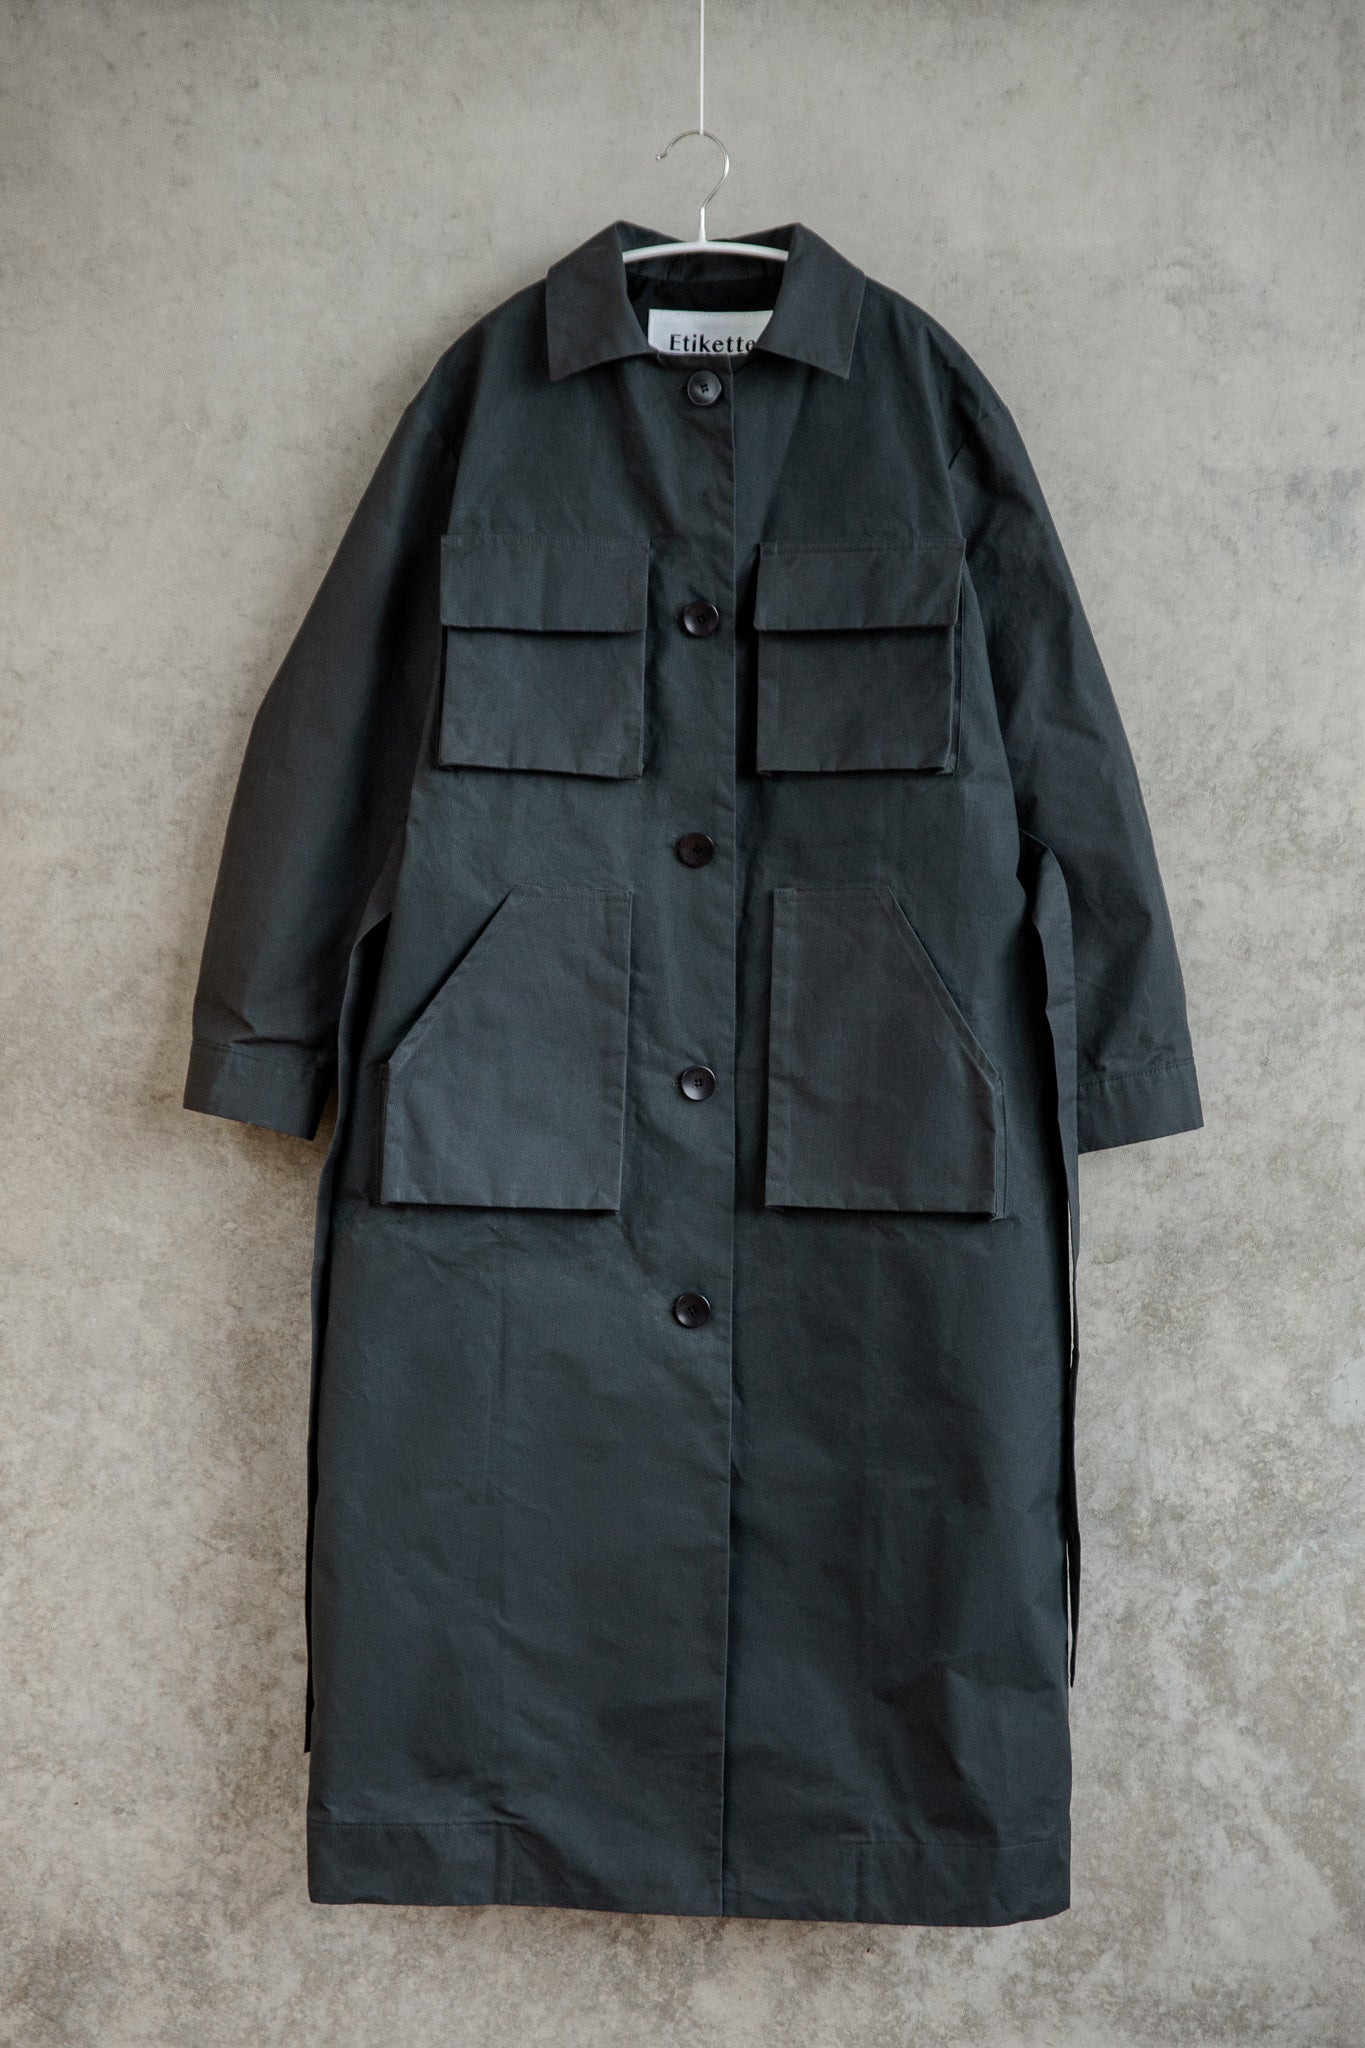 The Long Commuter Jacket #1